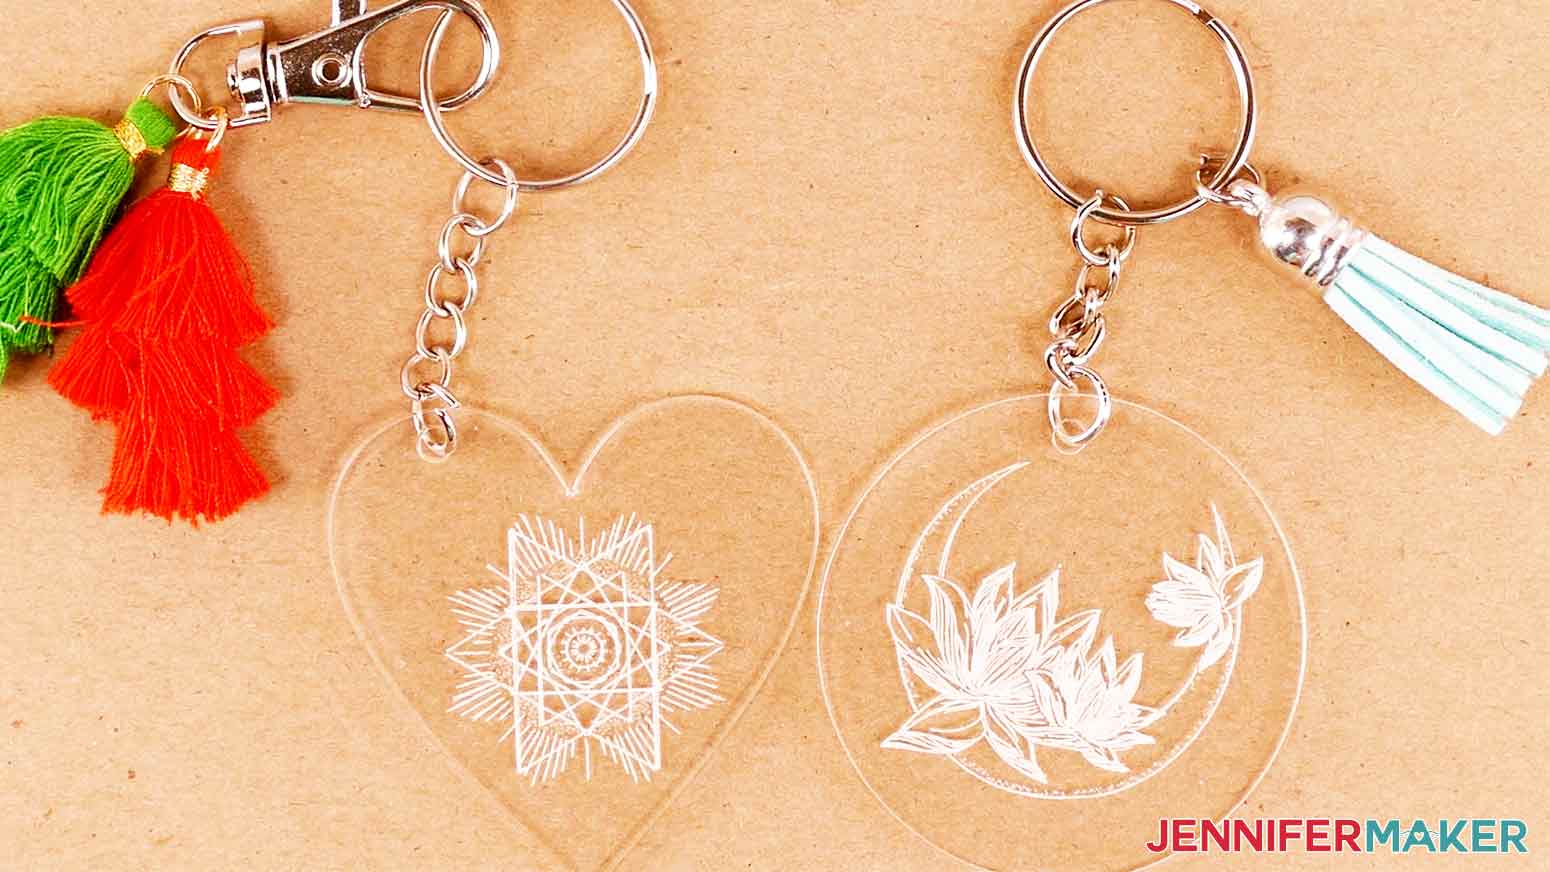 A picture of uniquely shaped acrylic engraving on keychains.